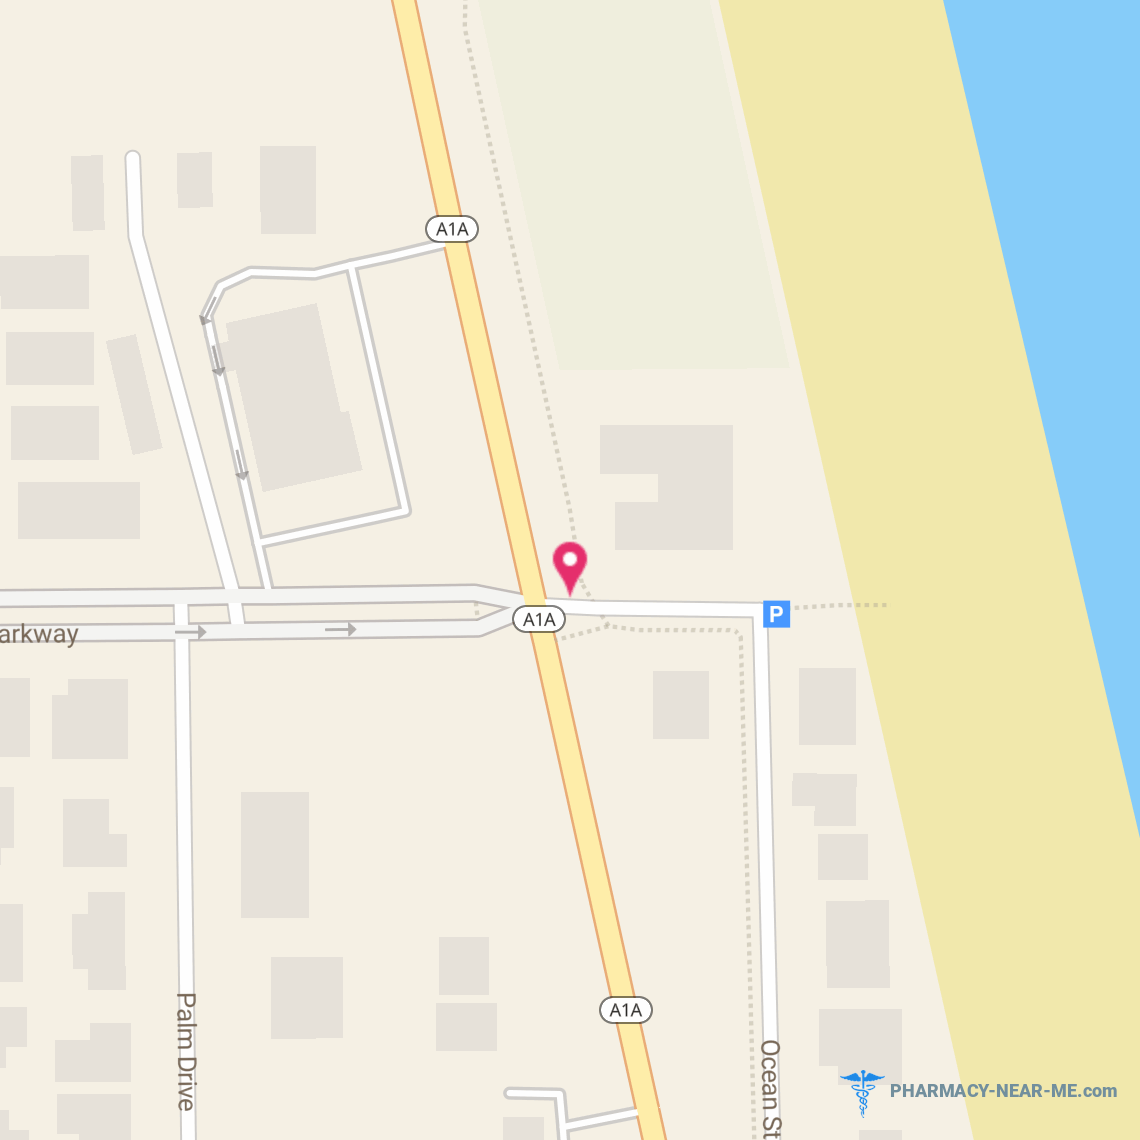 CVS PHARMACY # 01318 - Pharmacy Hours, Phone, Reviews & Information: 1596 Highway A1a, Satellite Beach, Florida 32937, United States